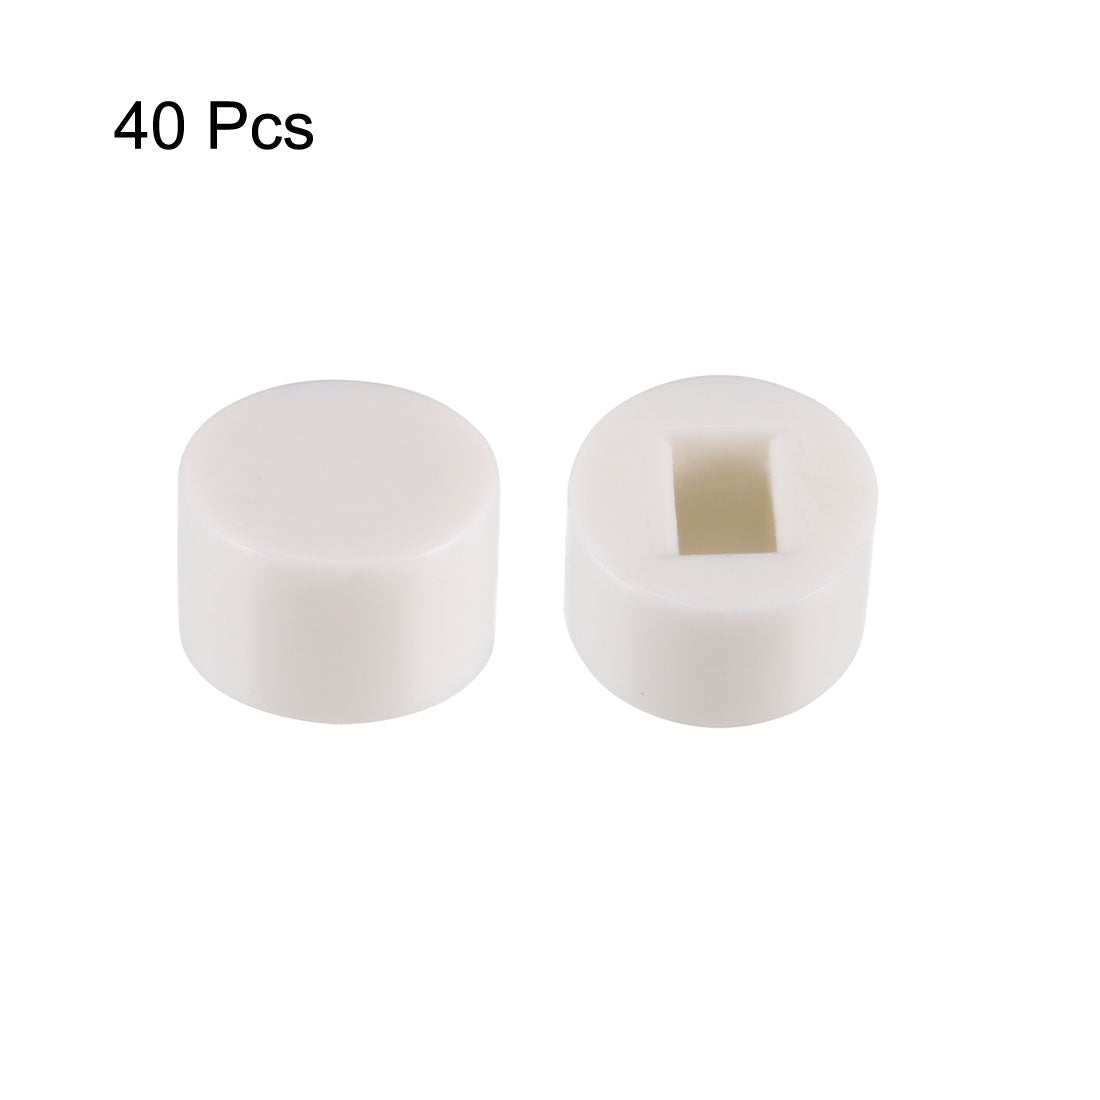 uxcell Uxcell 40Pcs Plastic 6x3.7mm Pushbutton Switch Caps Cover Keycaps Protector for 5.8x5.8 Latching Tactile Switch